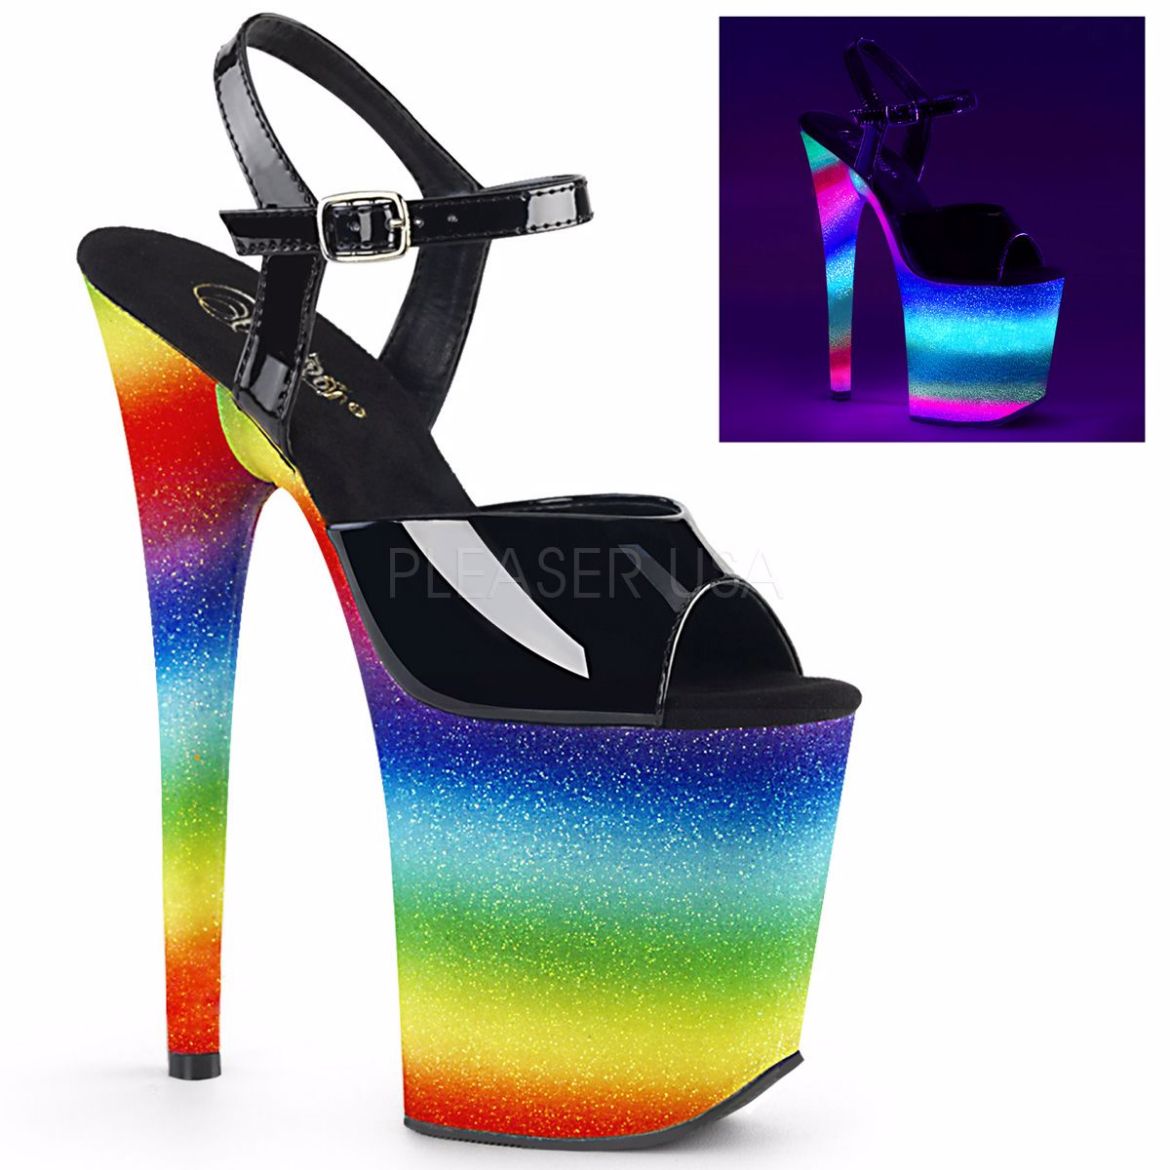 Product image of Pleaser FLAMINGO-809WR Black Patent/Rainbow Glitter 8 inch (20.3 cm) Heel 4 inch (10.2 cm) Wrapped Platform Ankle Strap Sandal Shoes